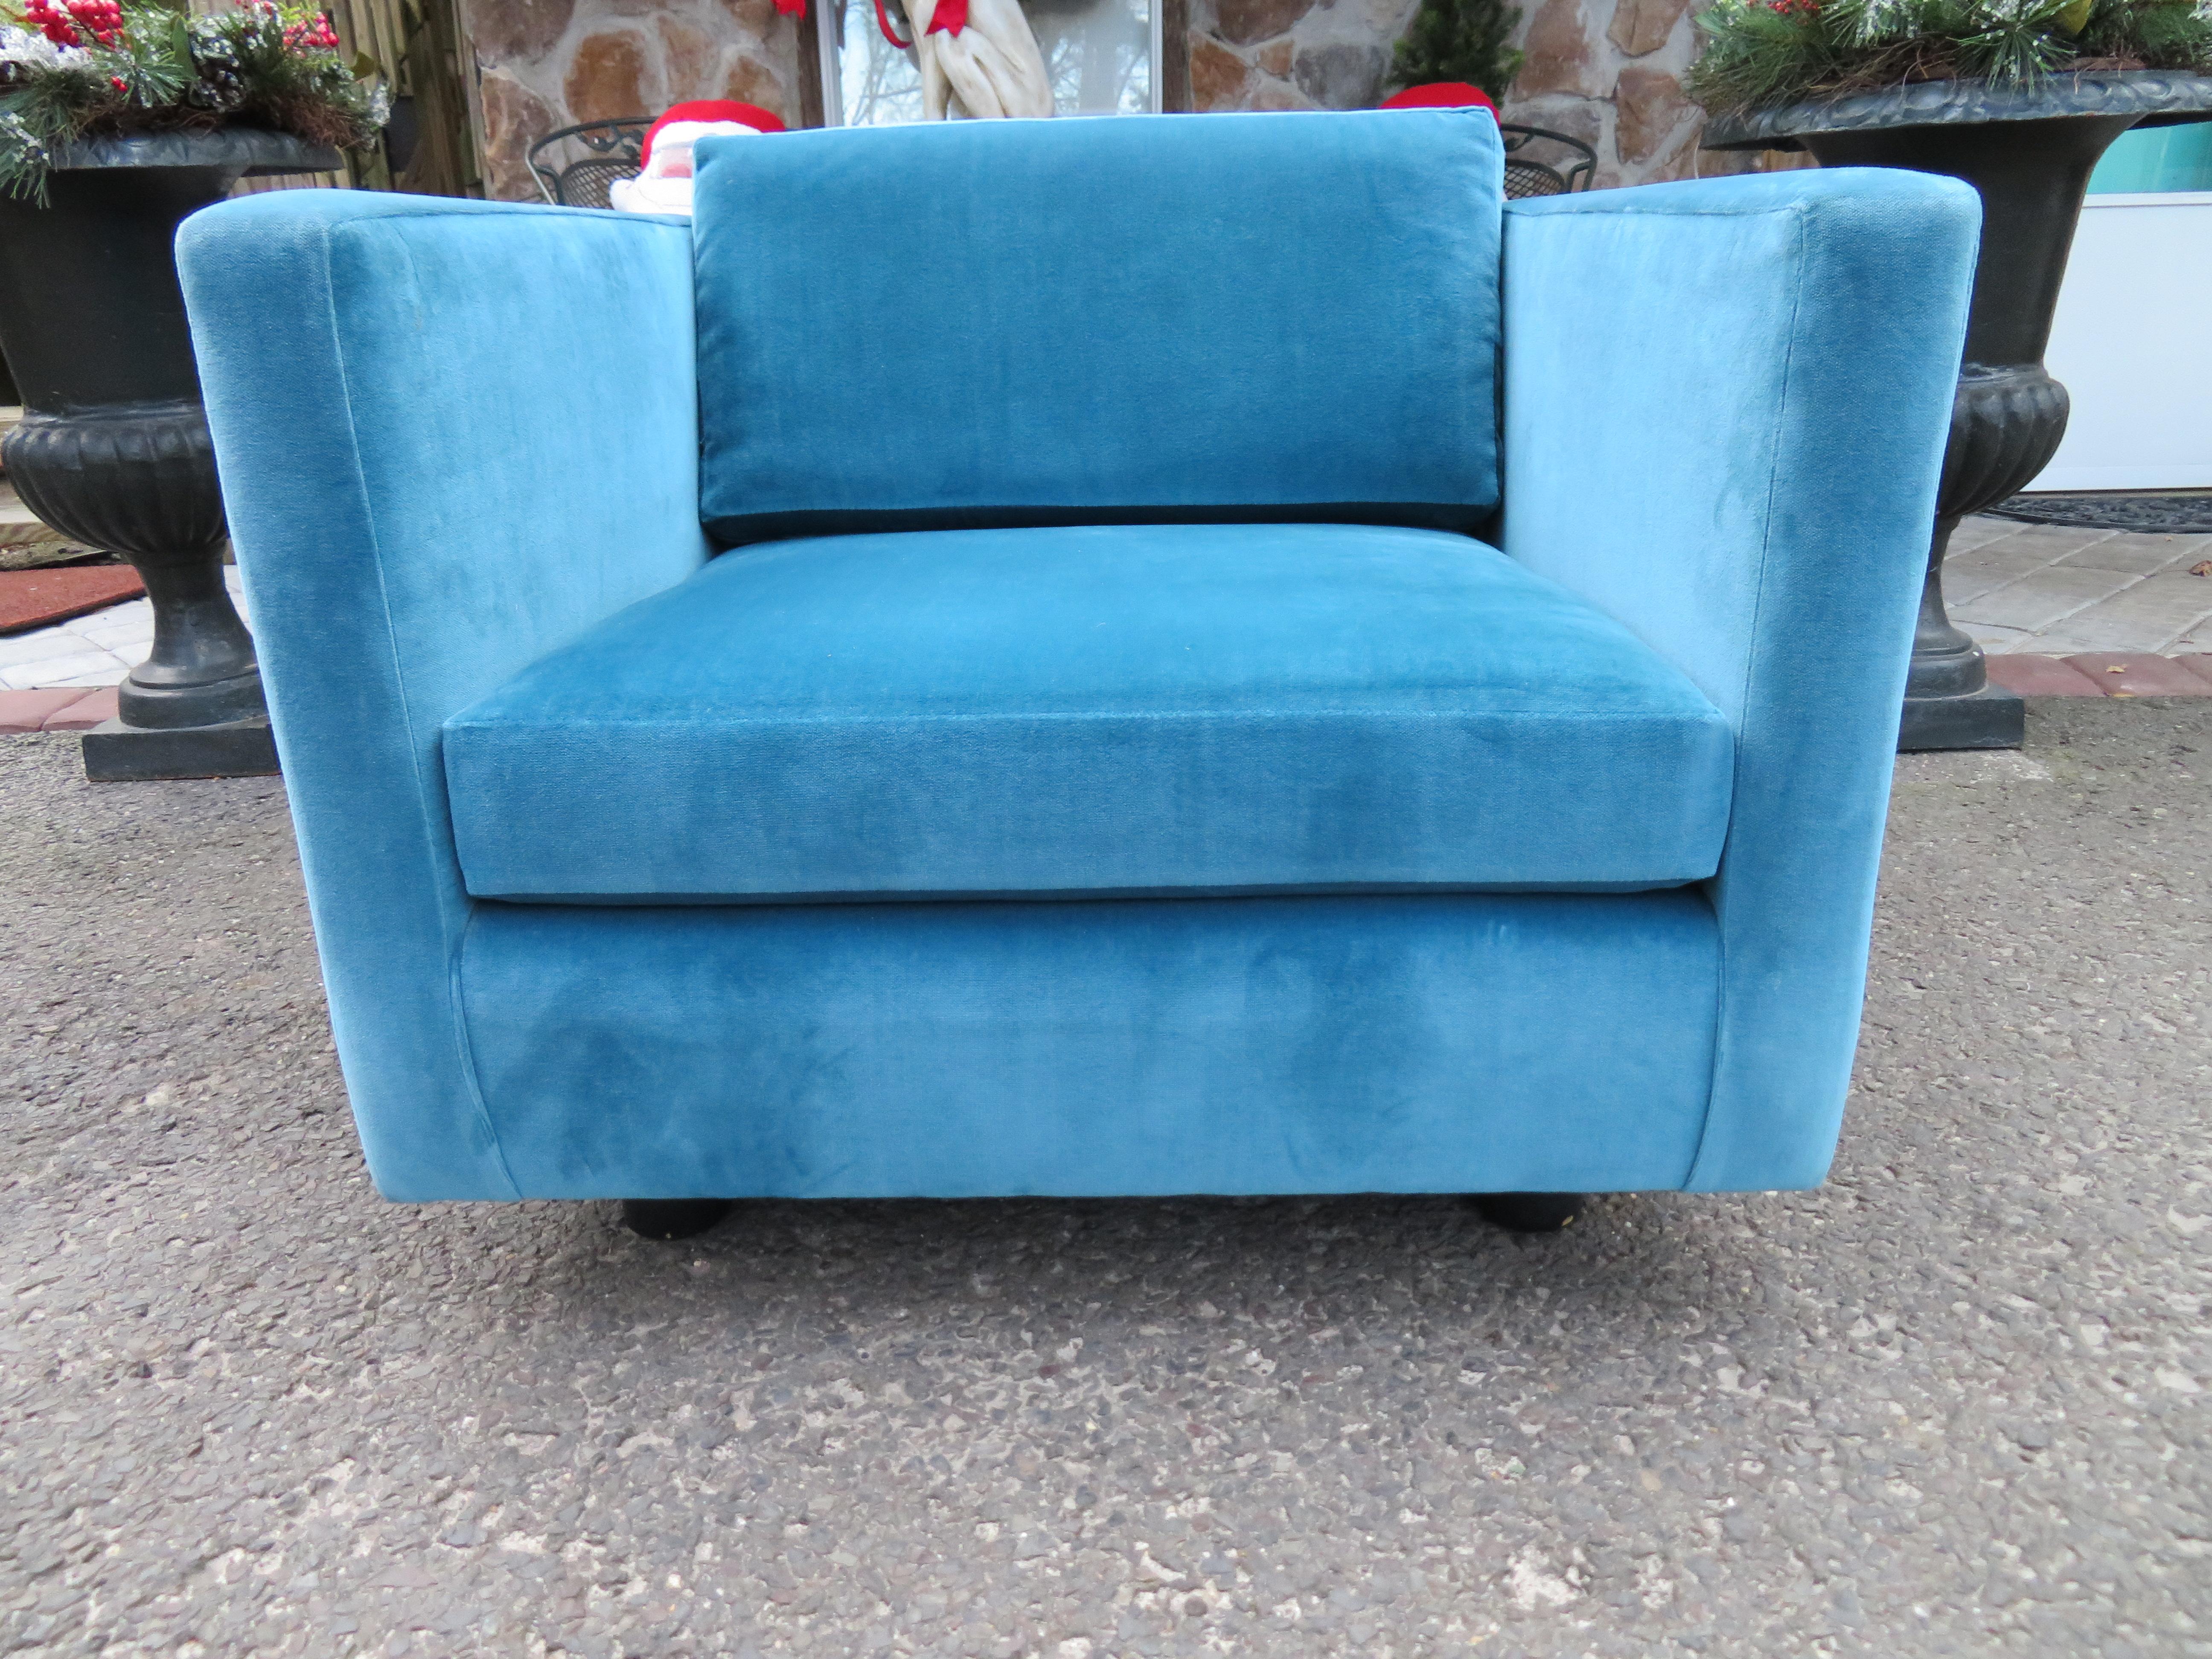 Handsome Milo Baughman for Directional even arm cube lounge chair. This chair was re-upholstered about 15 years ago in a stylish turquoise blue cotton velvet. The fabric still looks great with only some minor wear-it has nice vintage appeal for